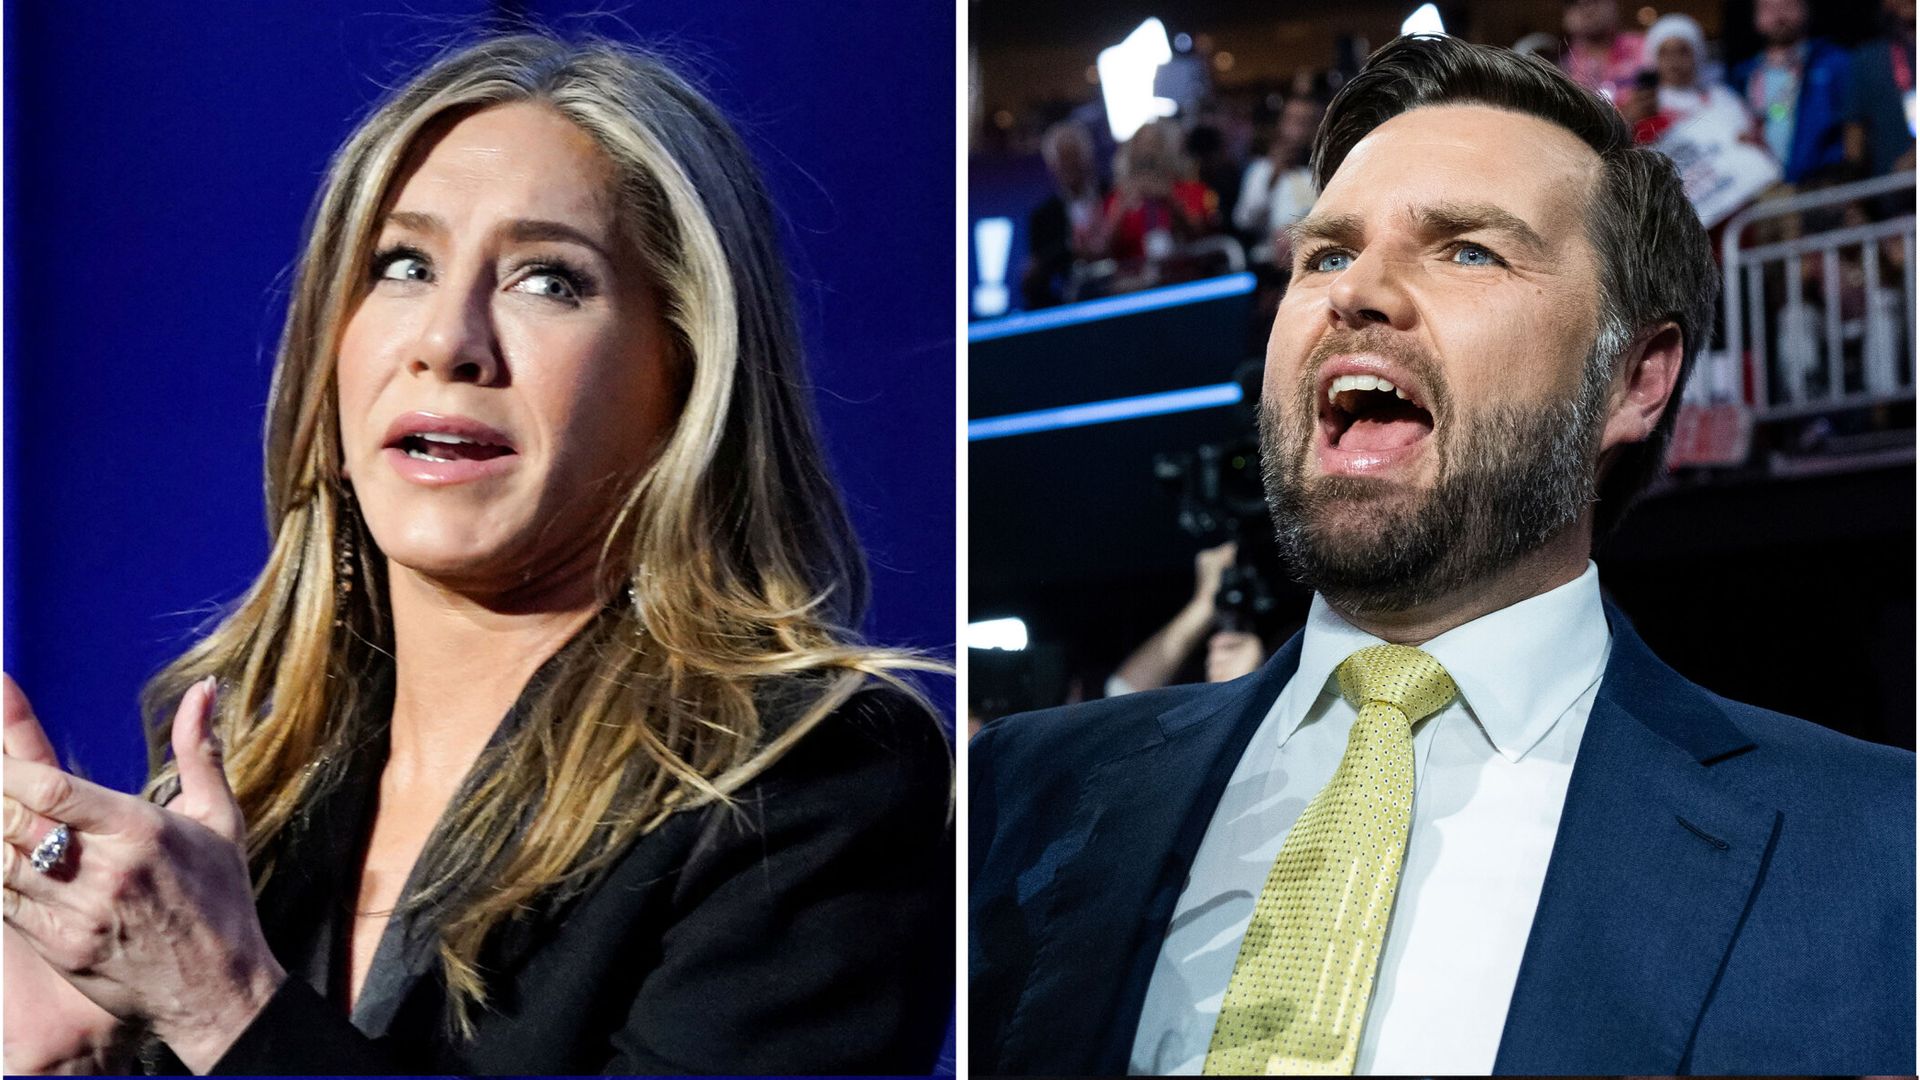 Aniston hits back at JD Vance: 'I pray your daughter is fortunate enough to bear children of her own one day'